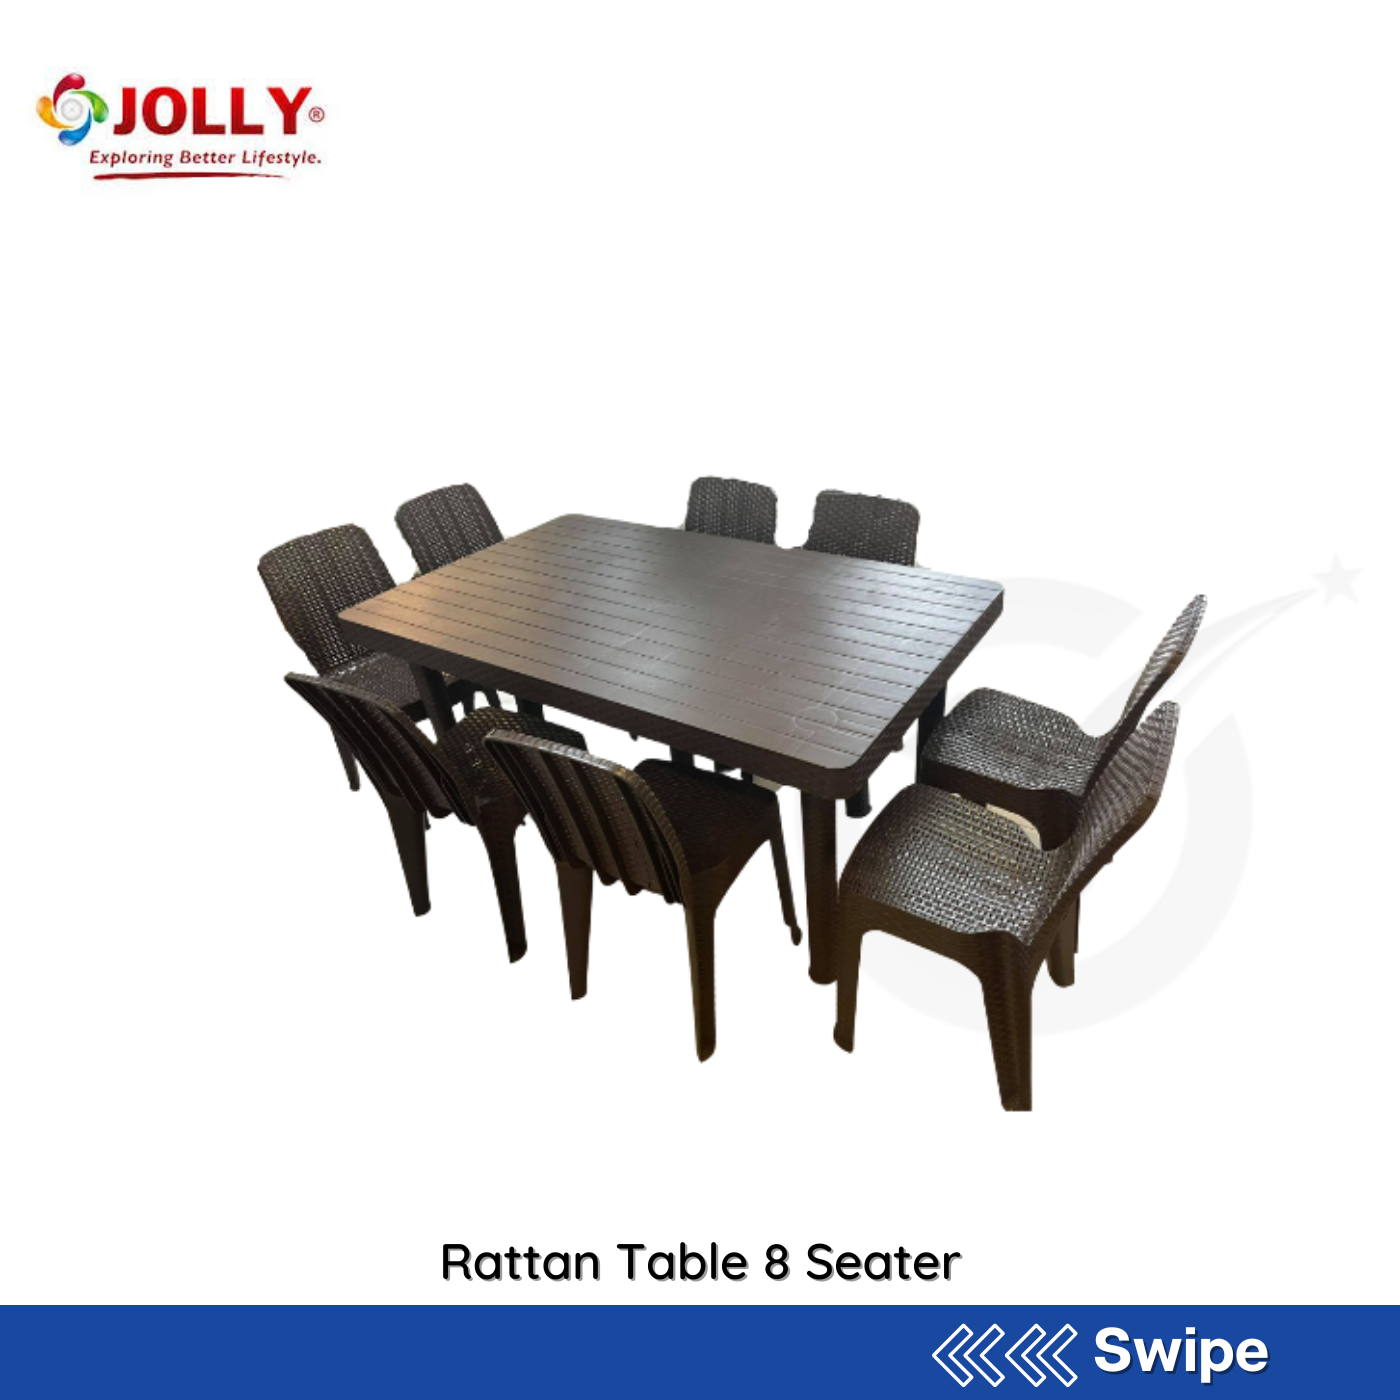 Rattan Table 8 Seater